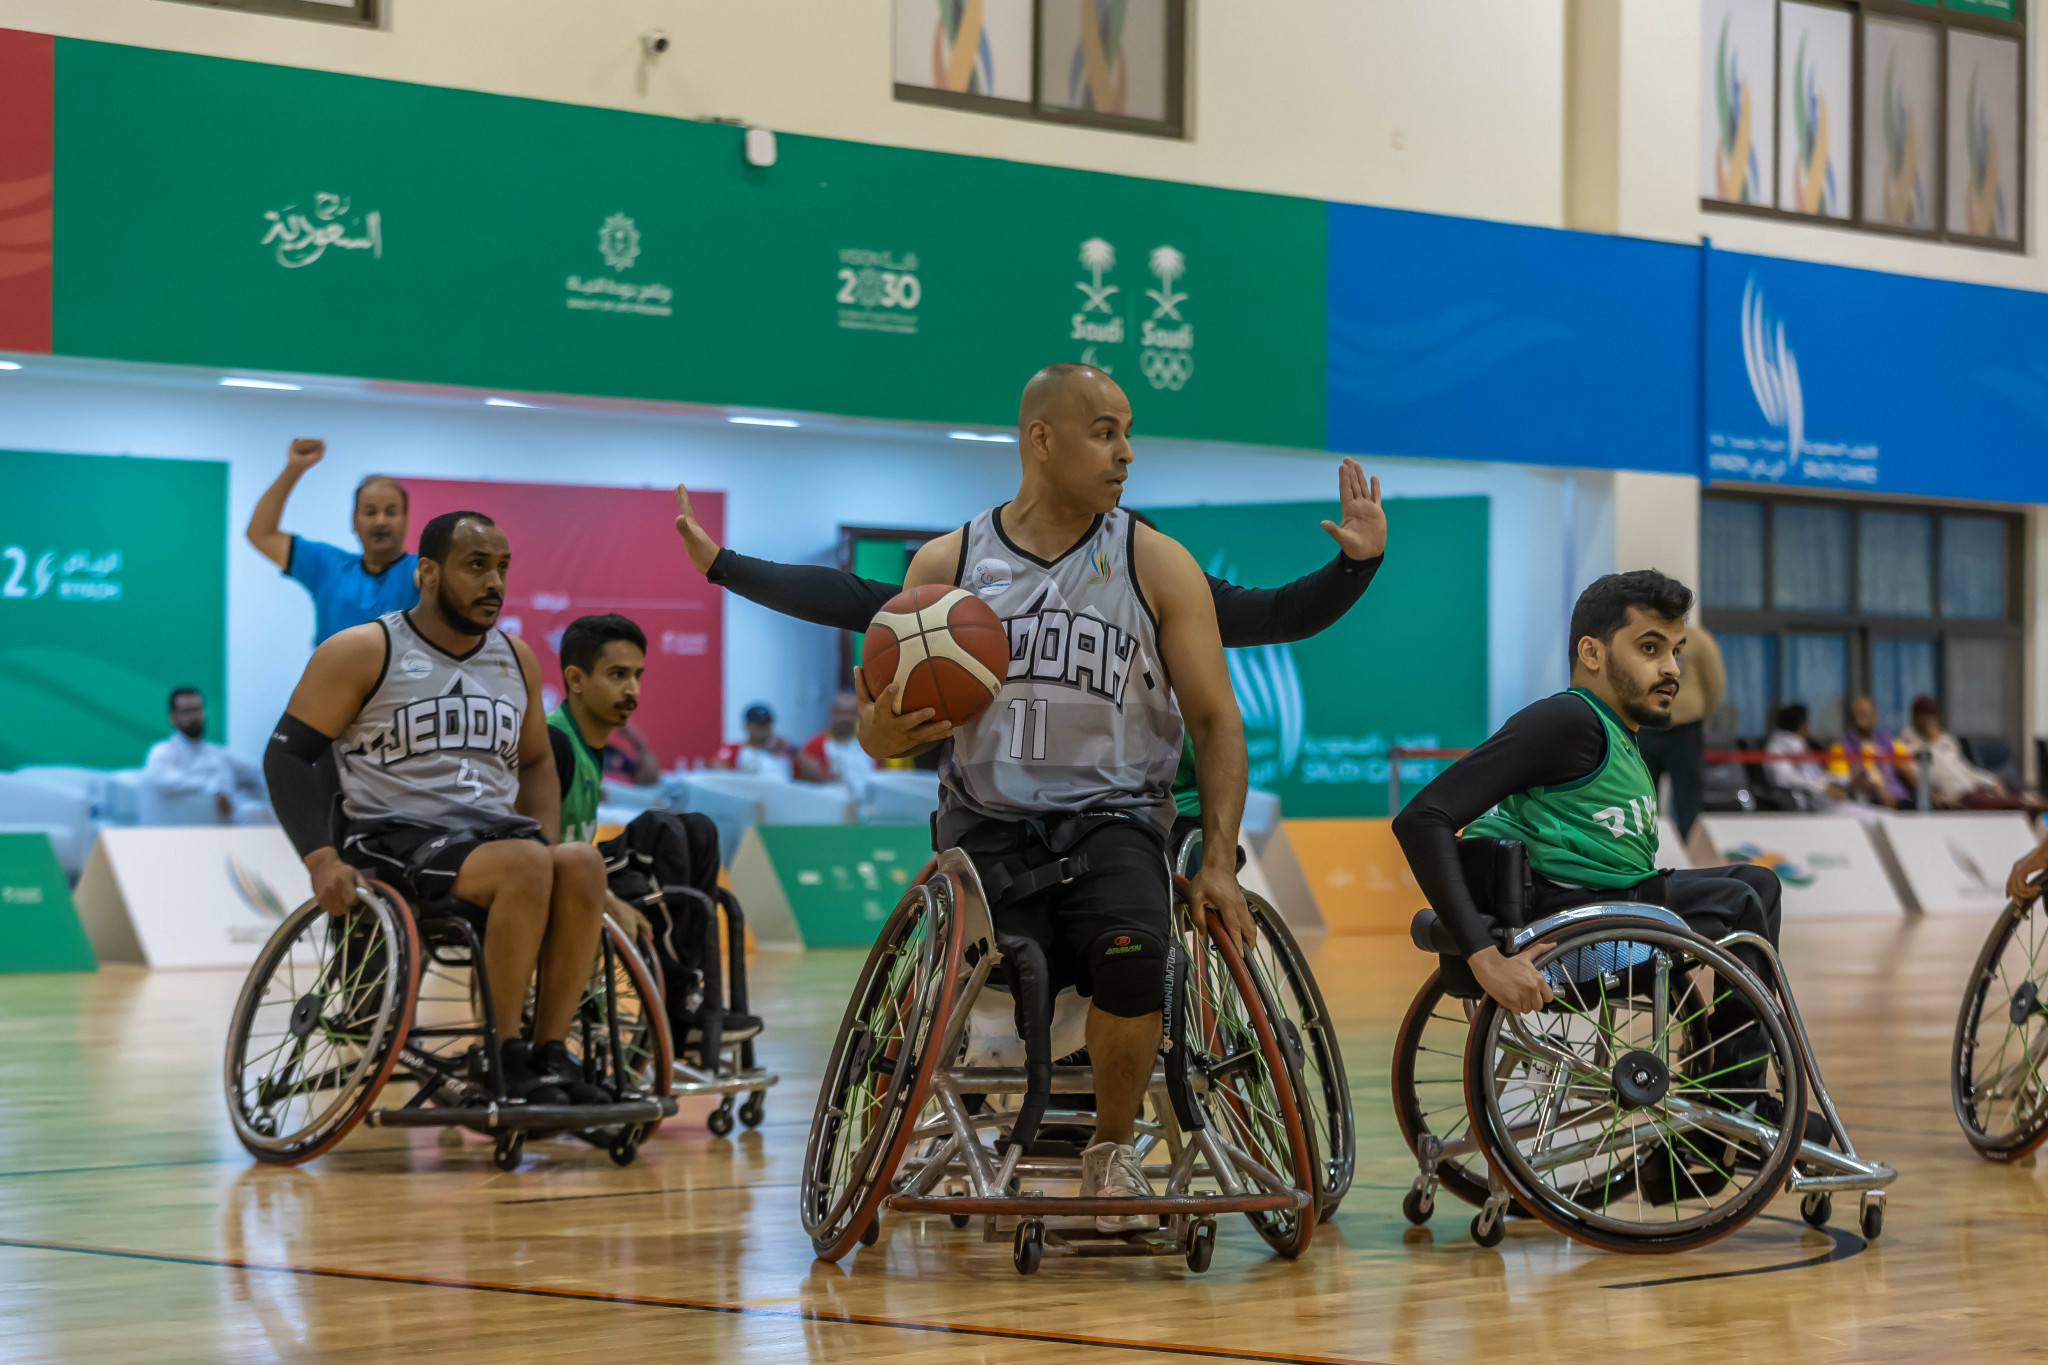 Teams fought to boost their position in the men's wheelchair basketball ©Saudi Games